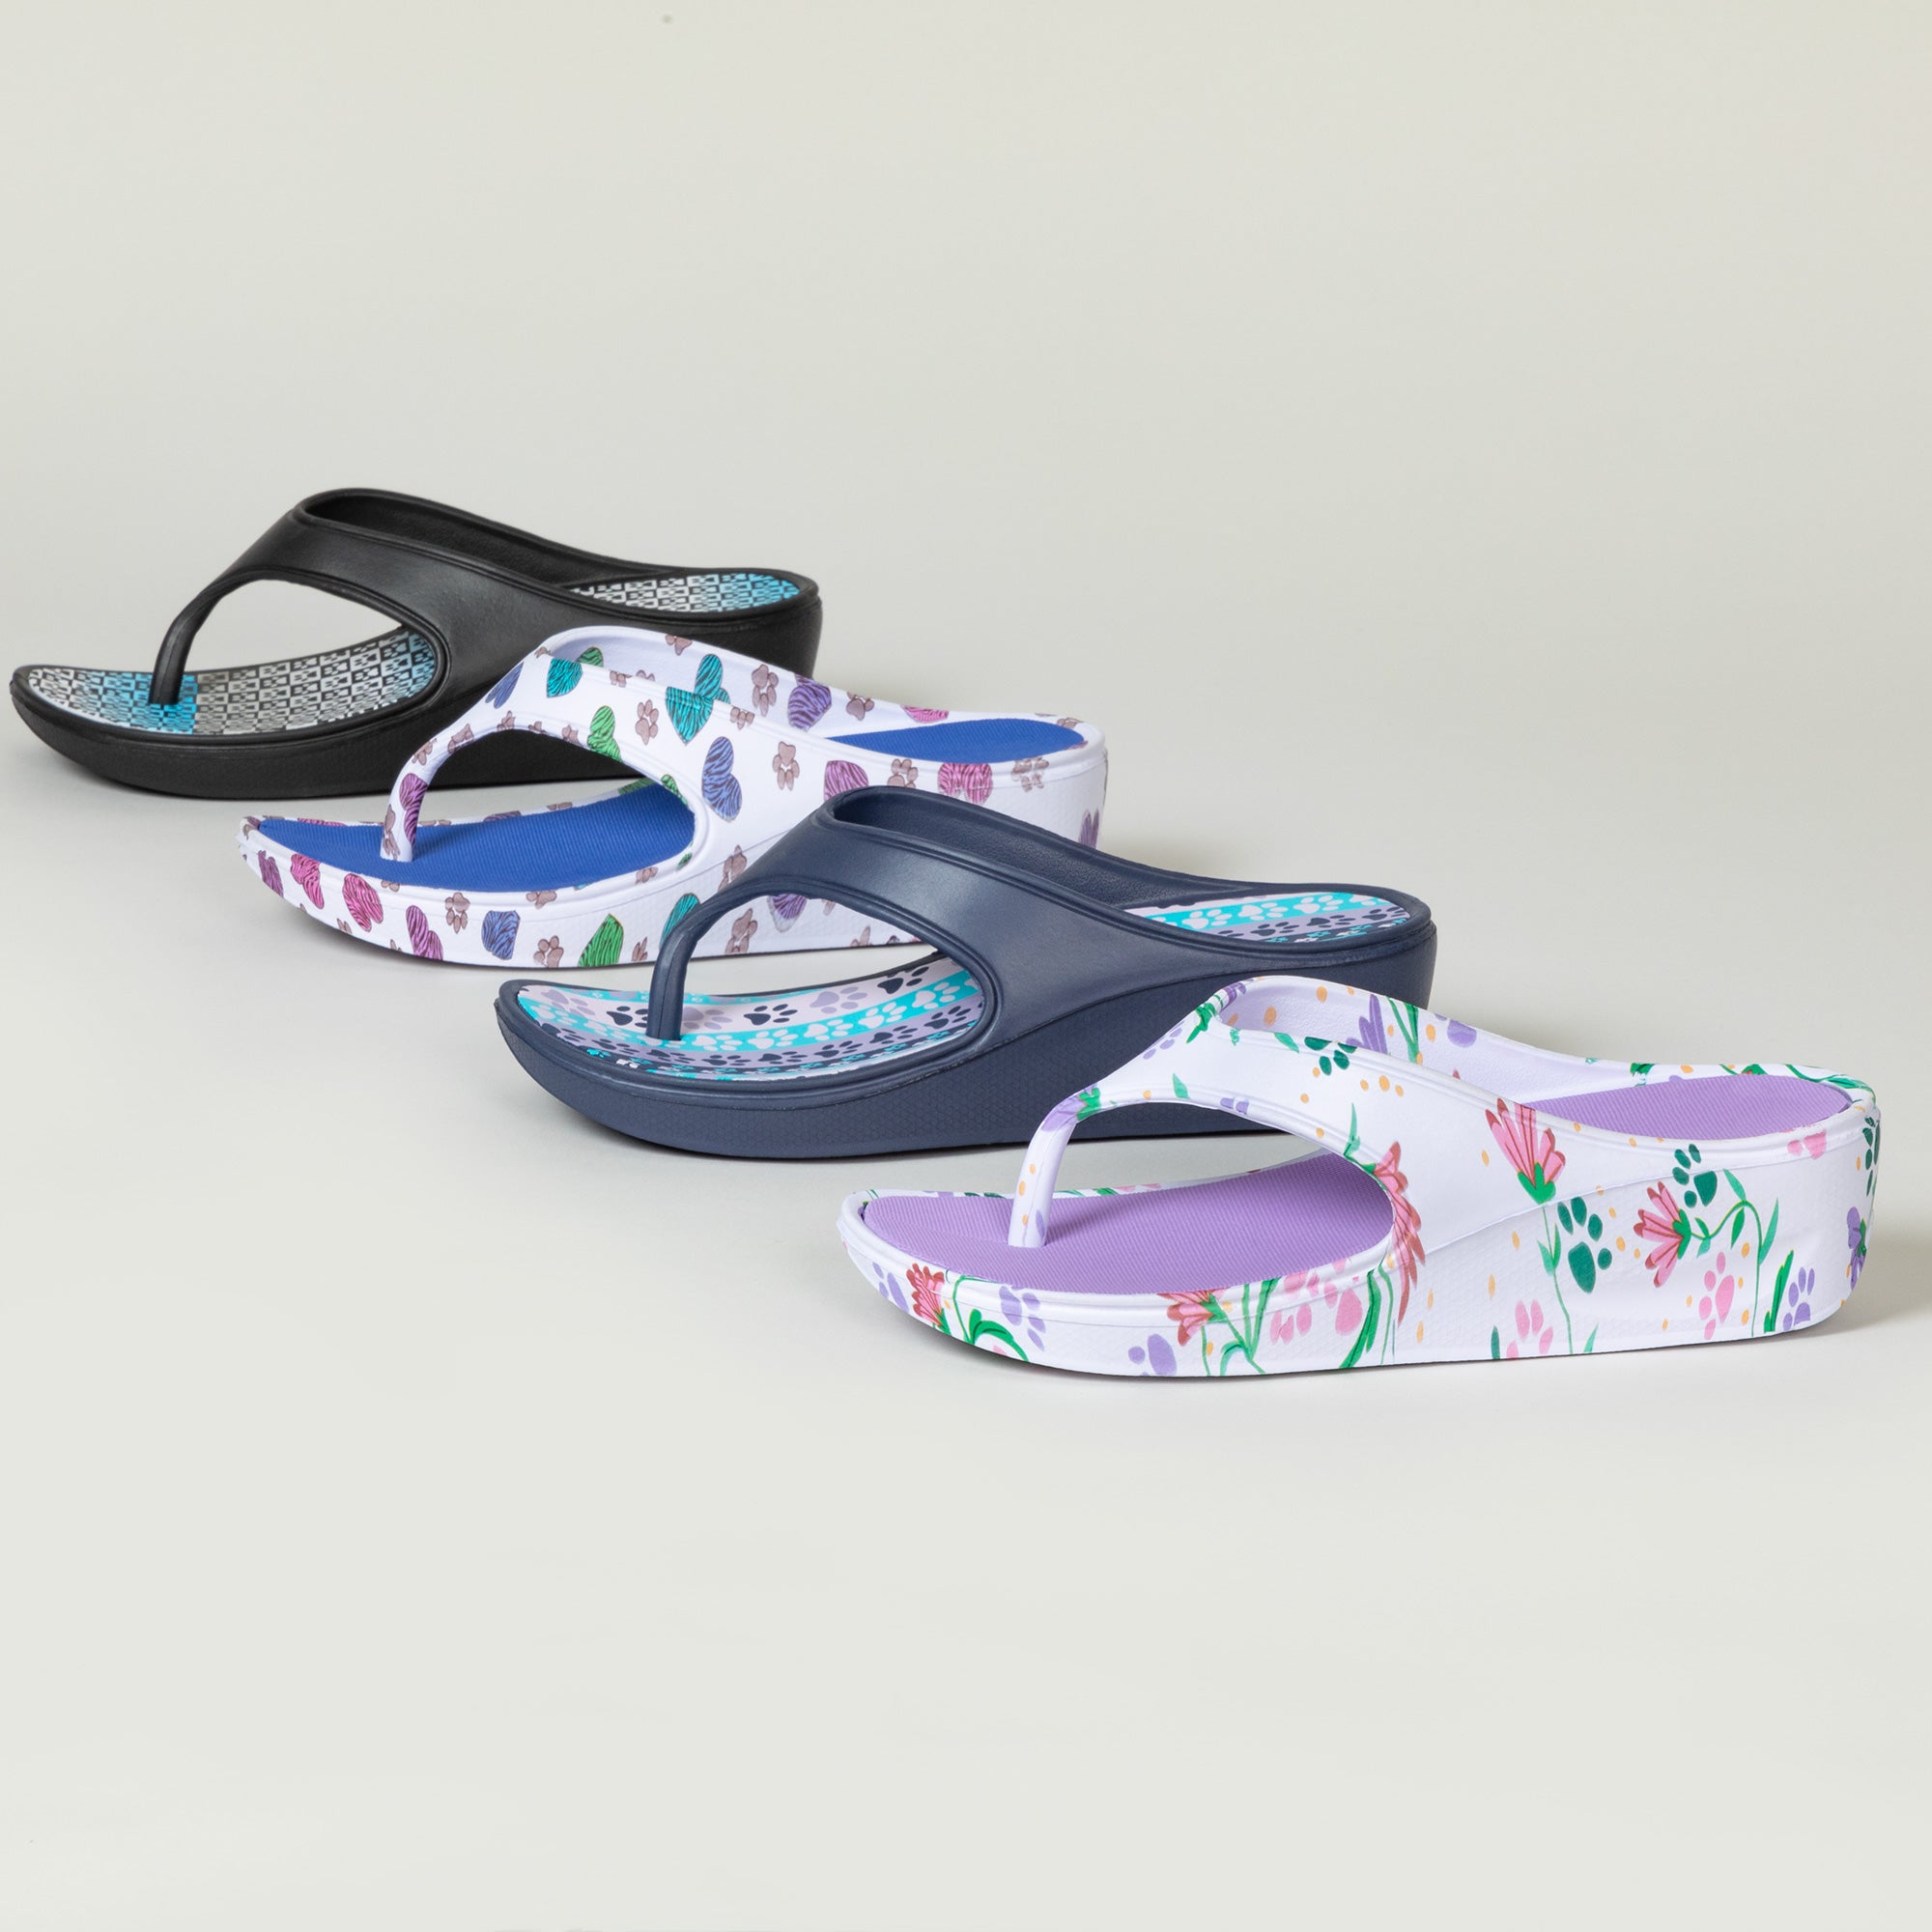 Paw Print Wedge Flip Flops - Checkered Paws - 9